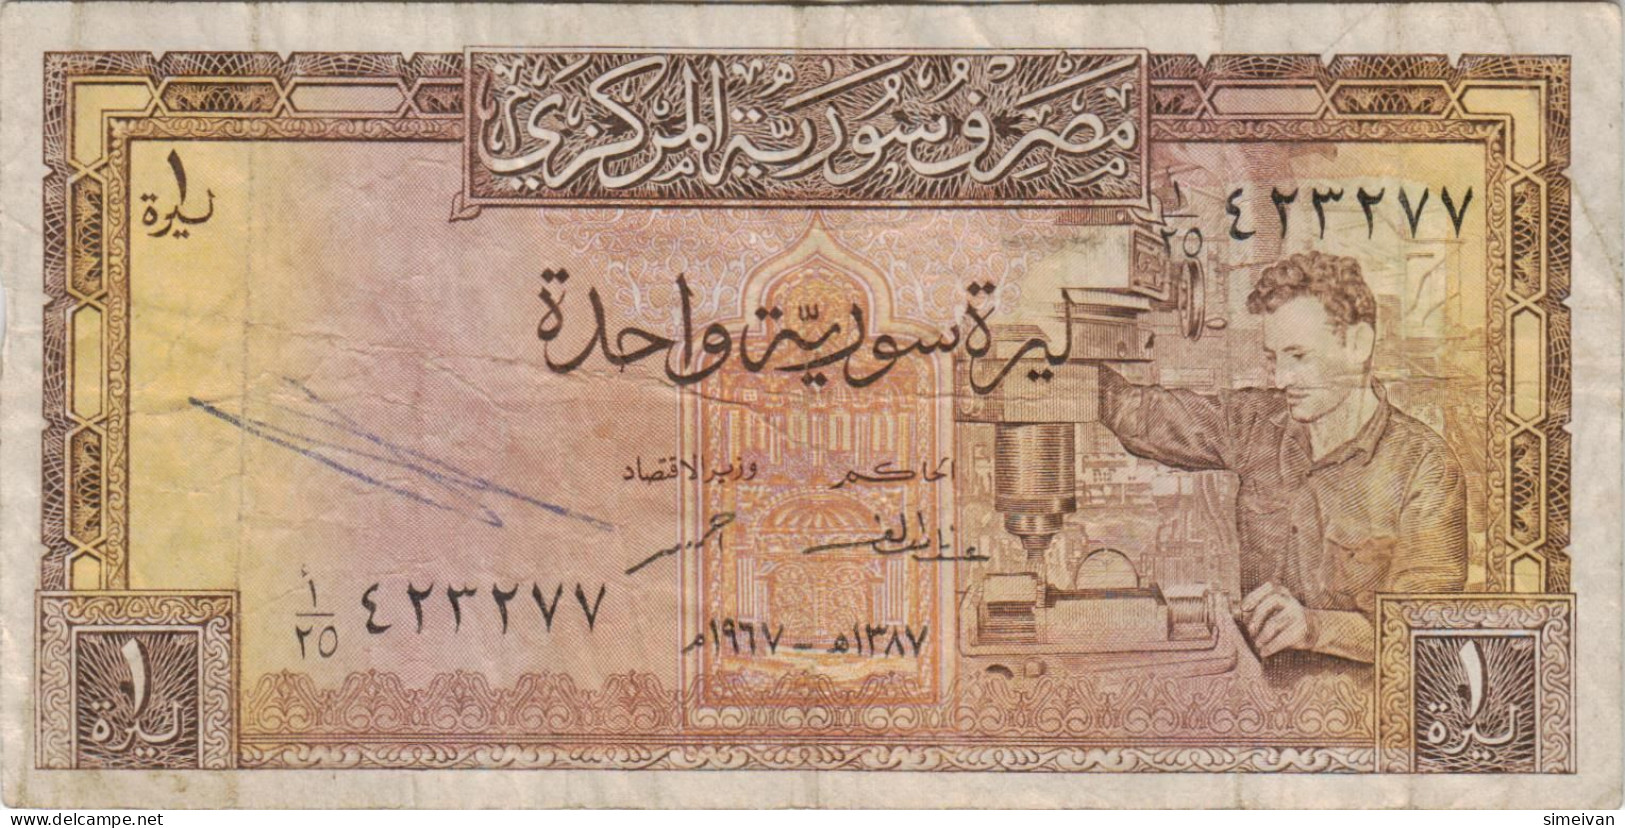 Syria 1 Pound 1967 P-93b Banknote Middle East Currency Syrie Syrien #5341 - Syrien